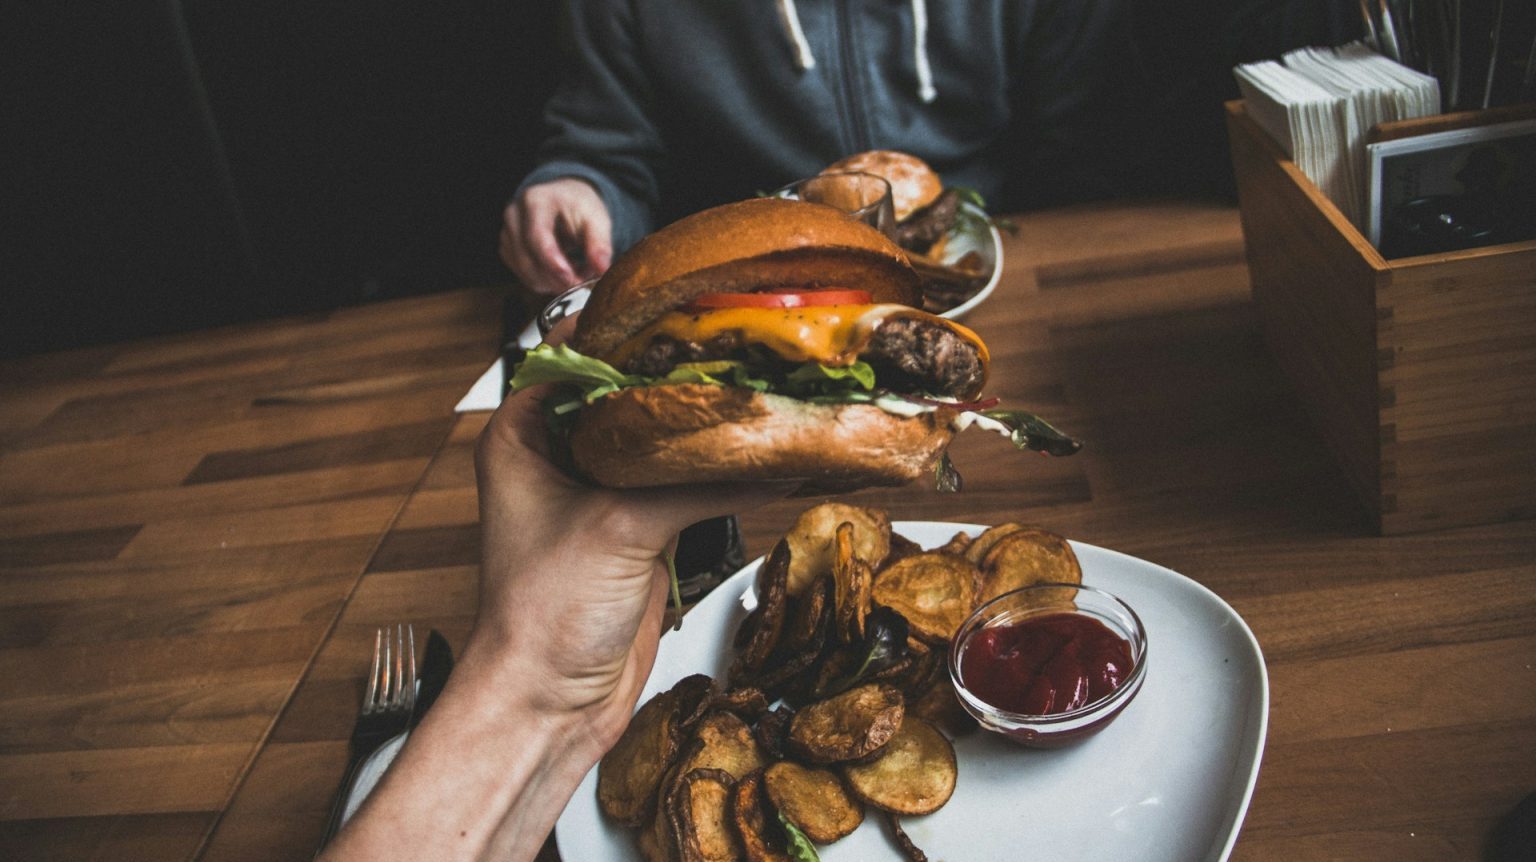 A person holding a burger with fries and ketchup on a wooden table.